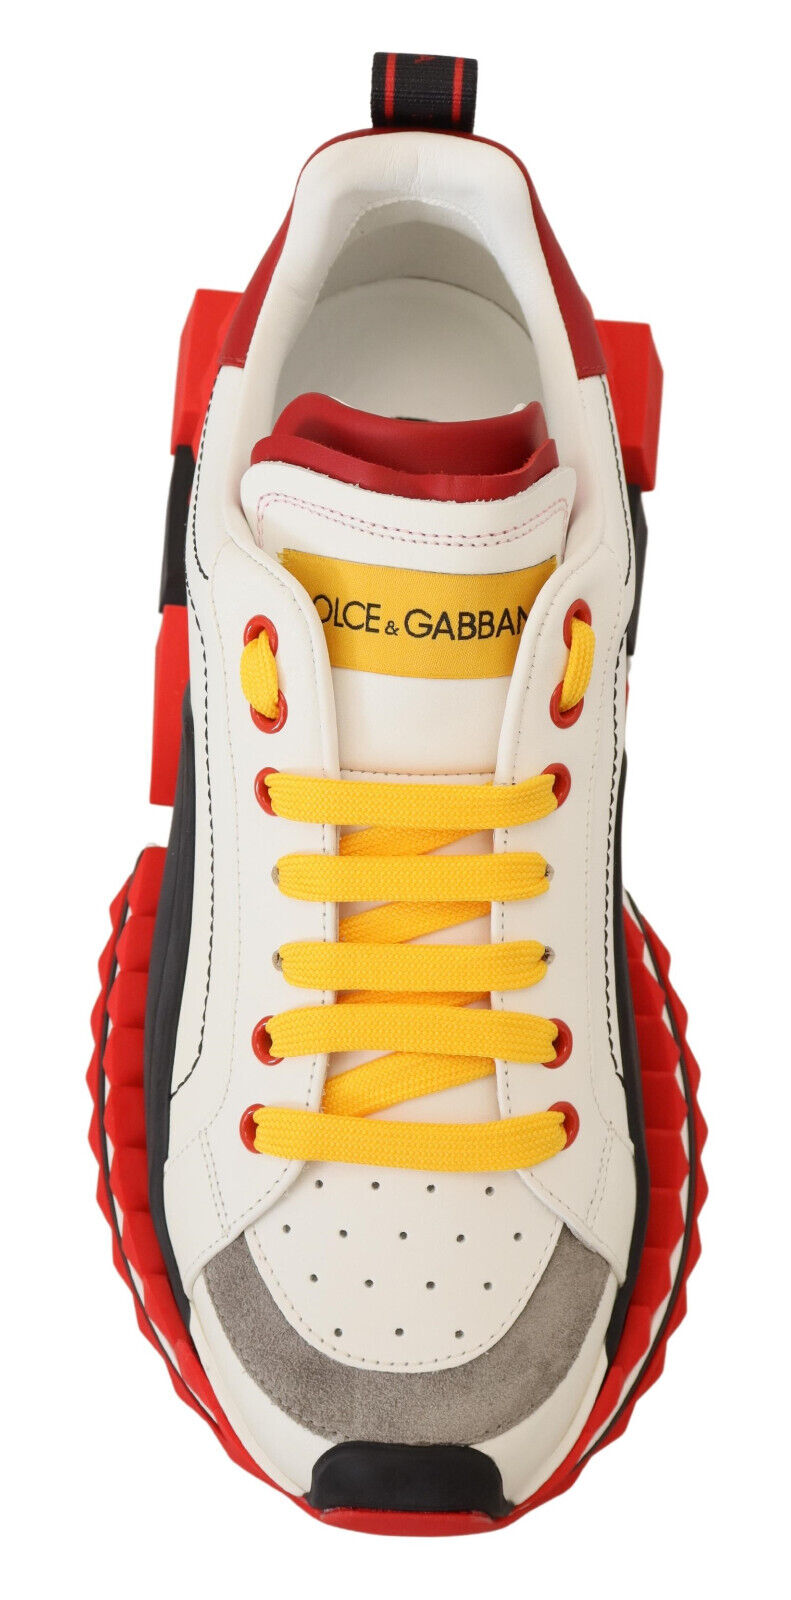 White Red Black Leather Super King Sneakers